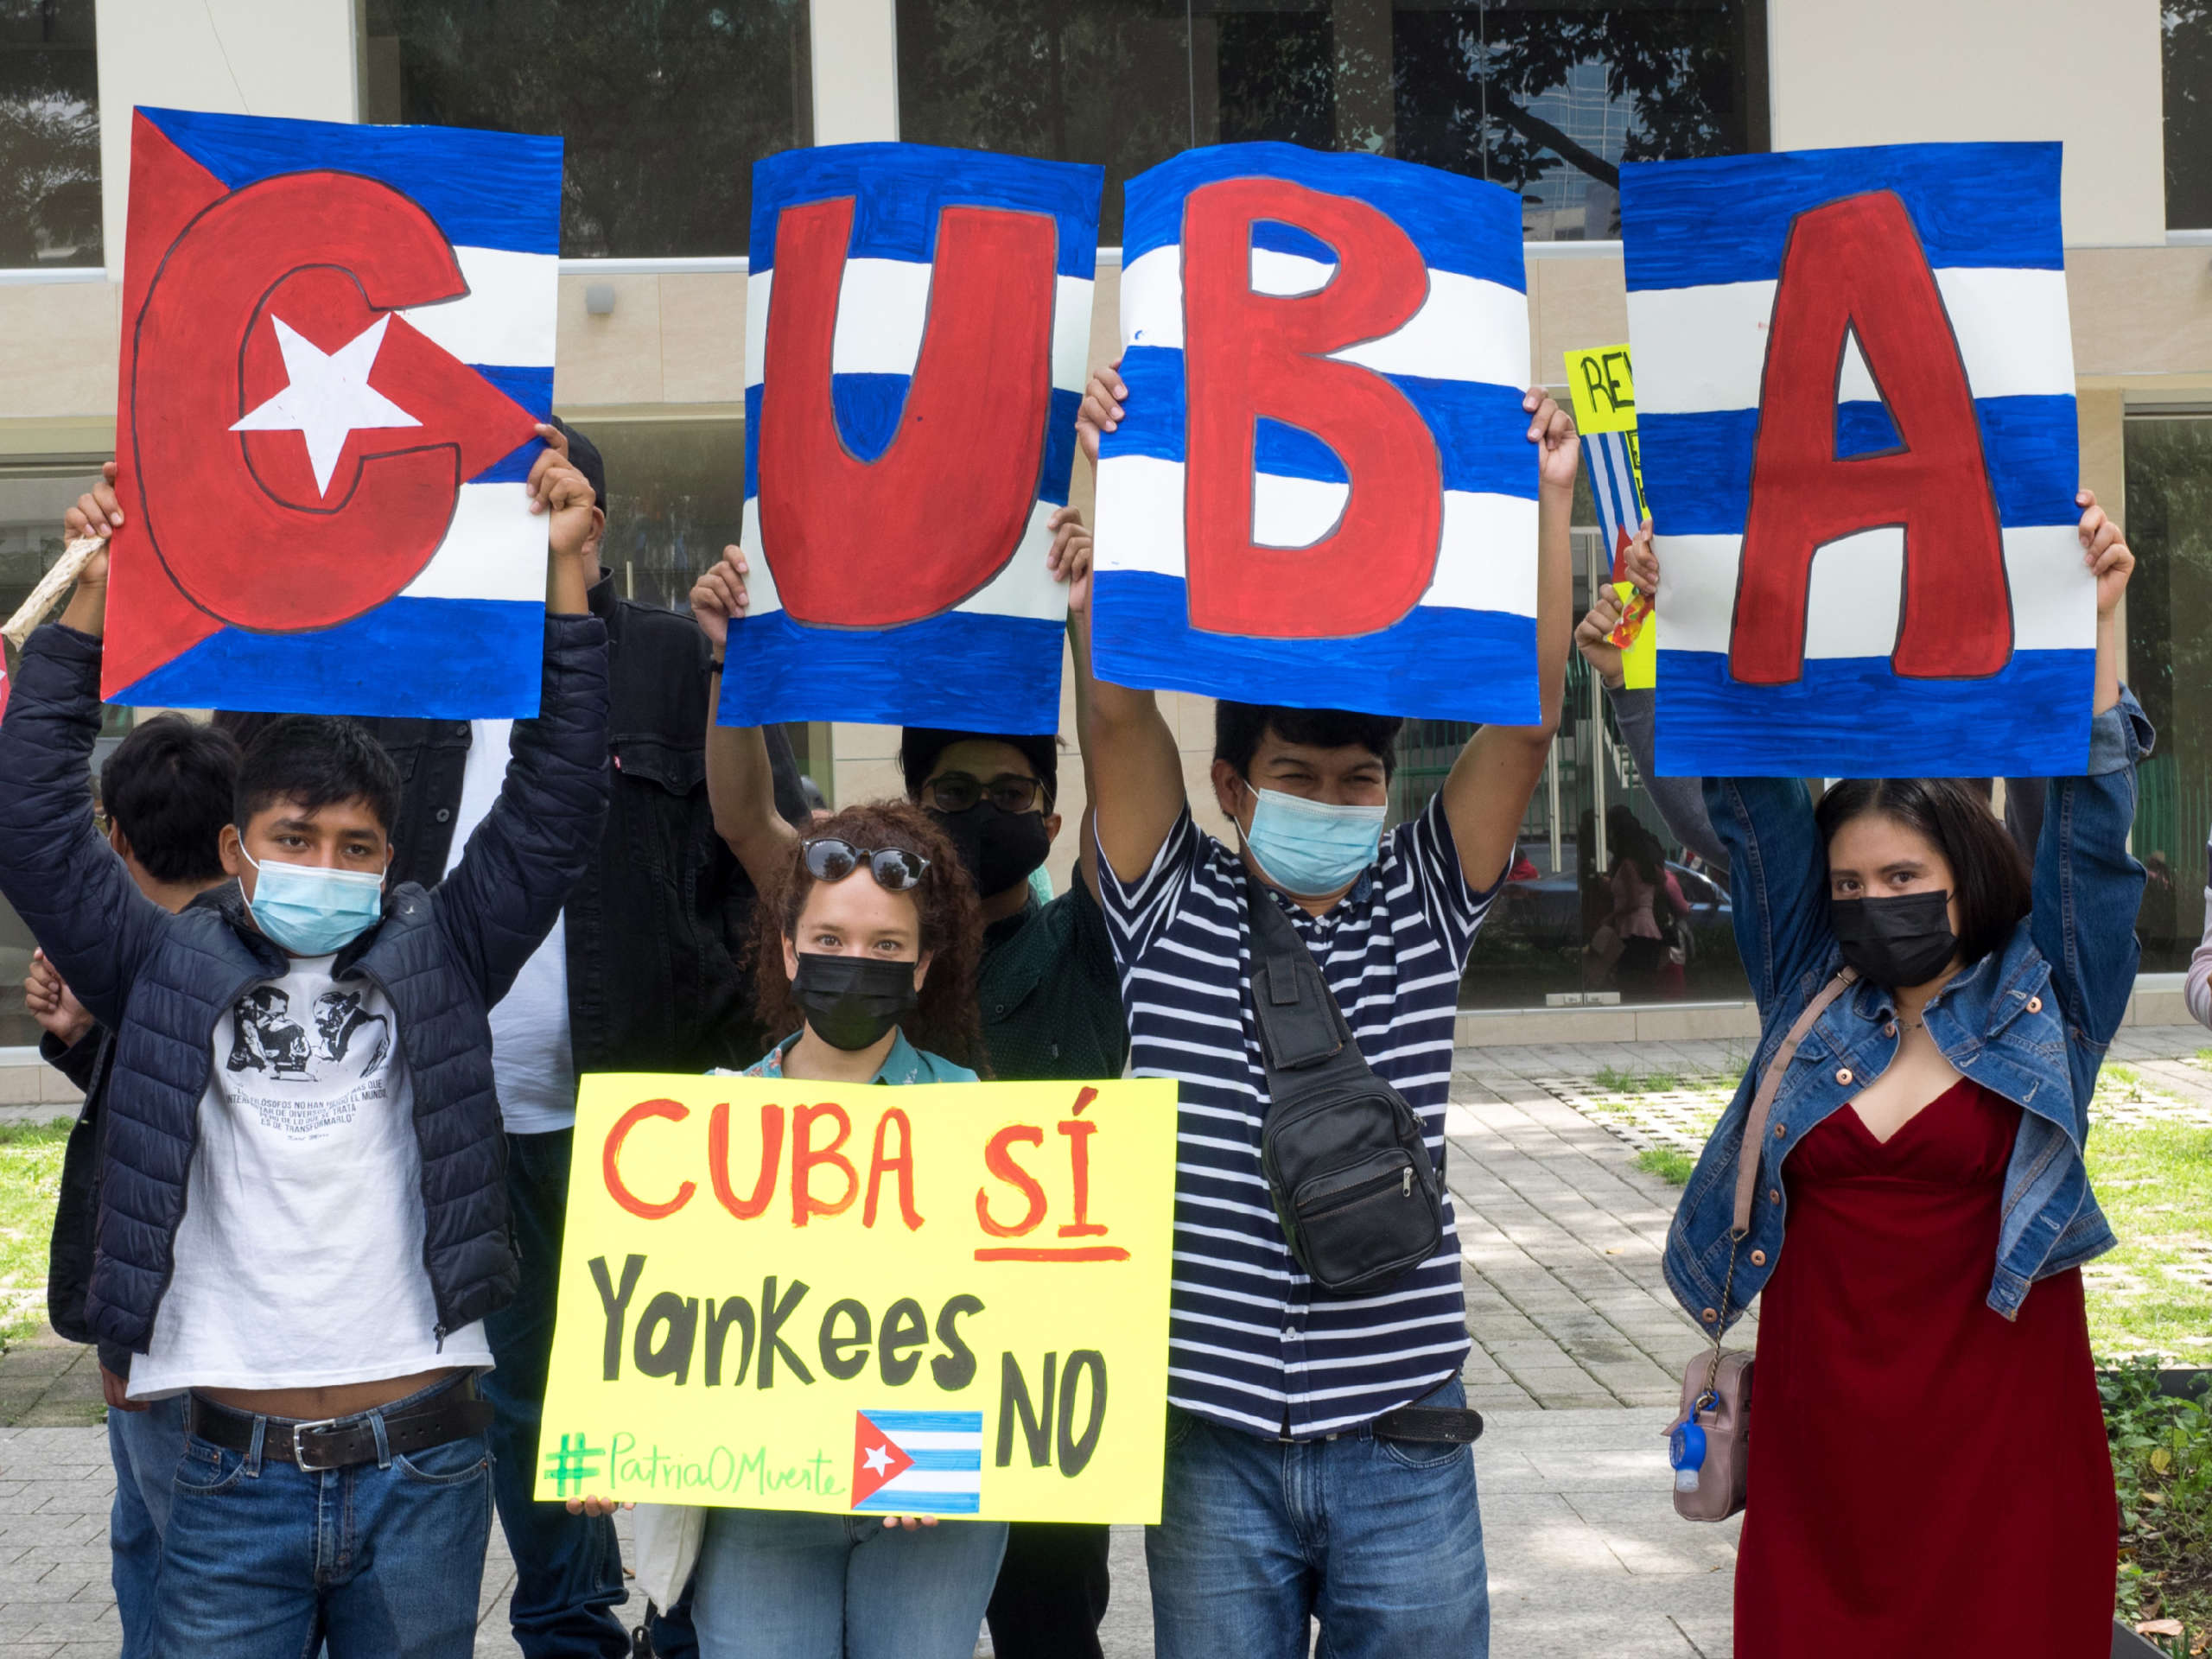 Students from the National Federation of Revolutionary Students demonstrate in support of the Cuban Revolution near the Cuban embassy in Mexico City, Mexico, July 17, 2021.